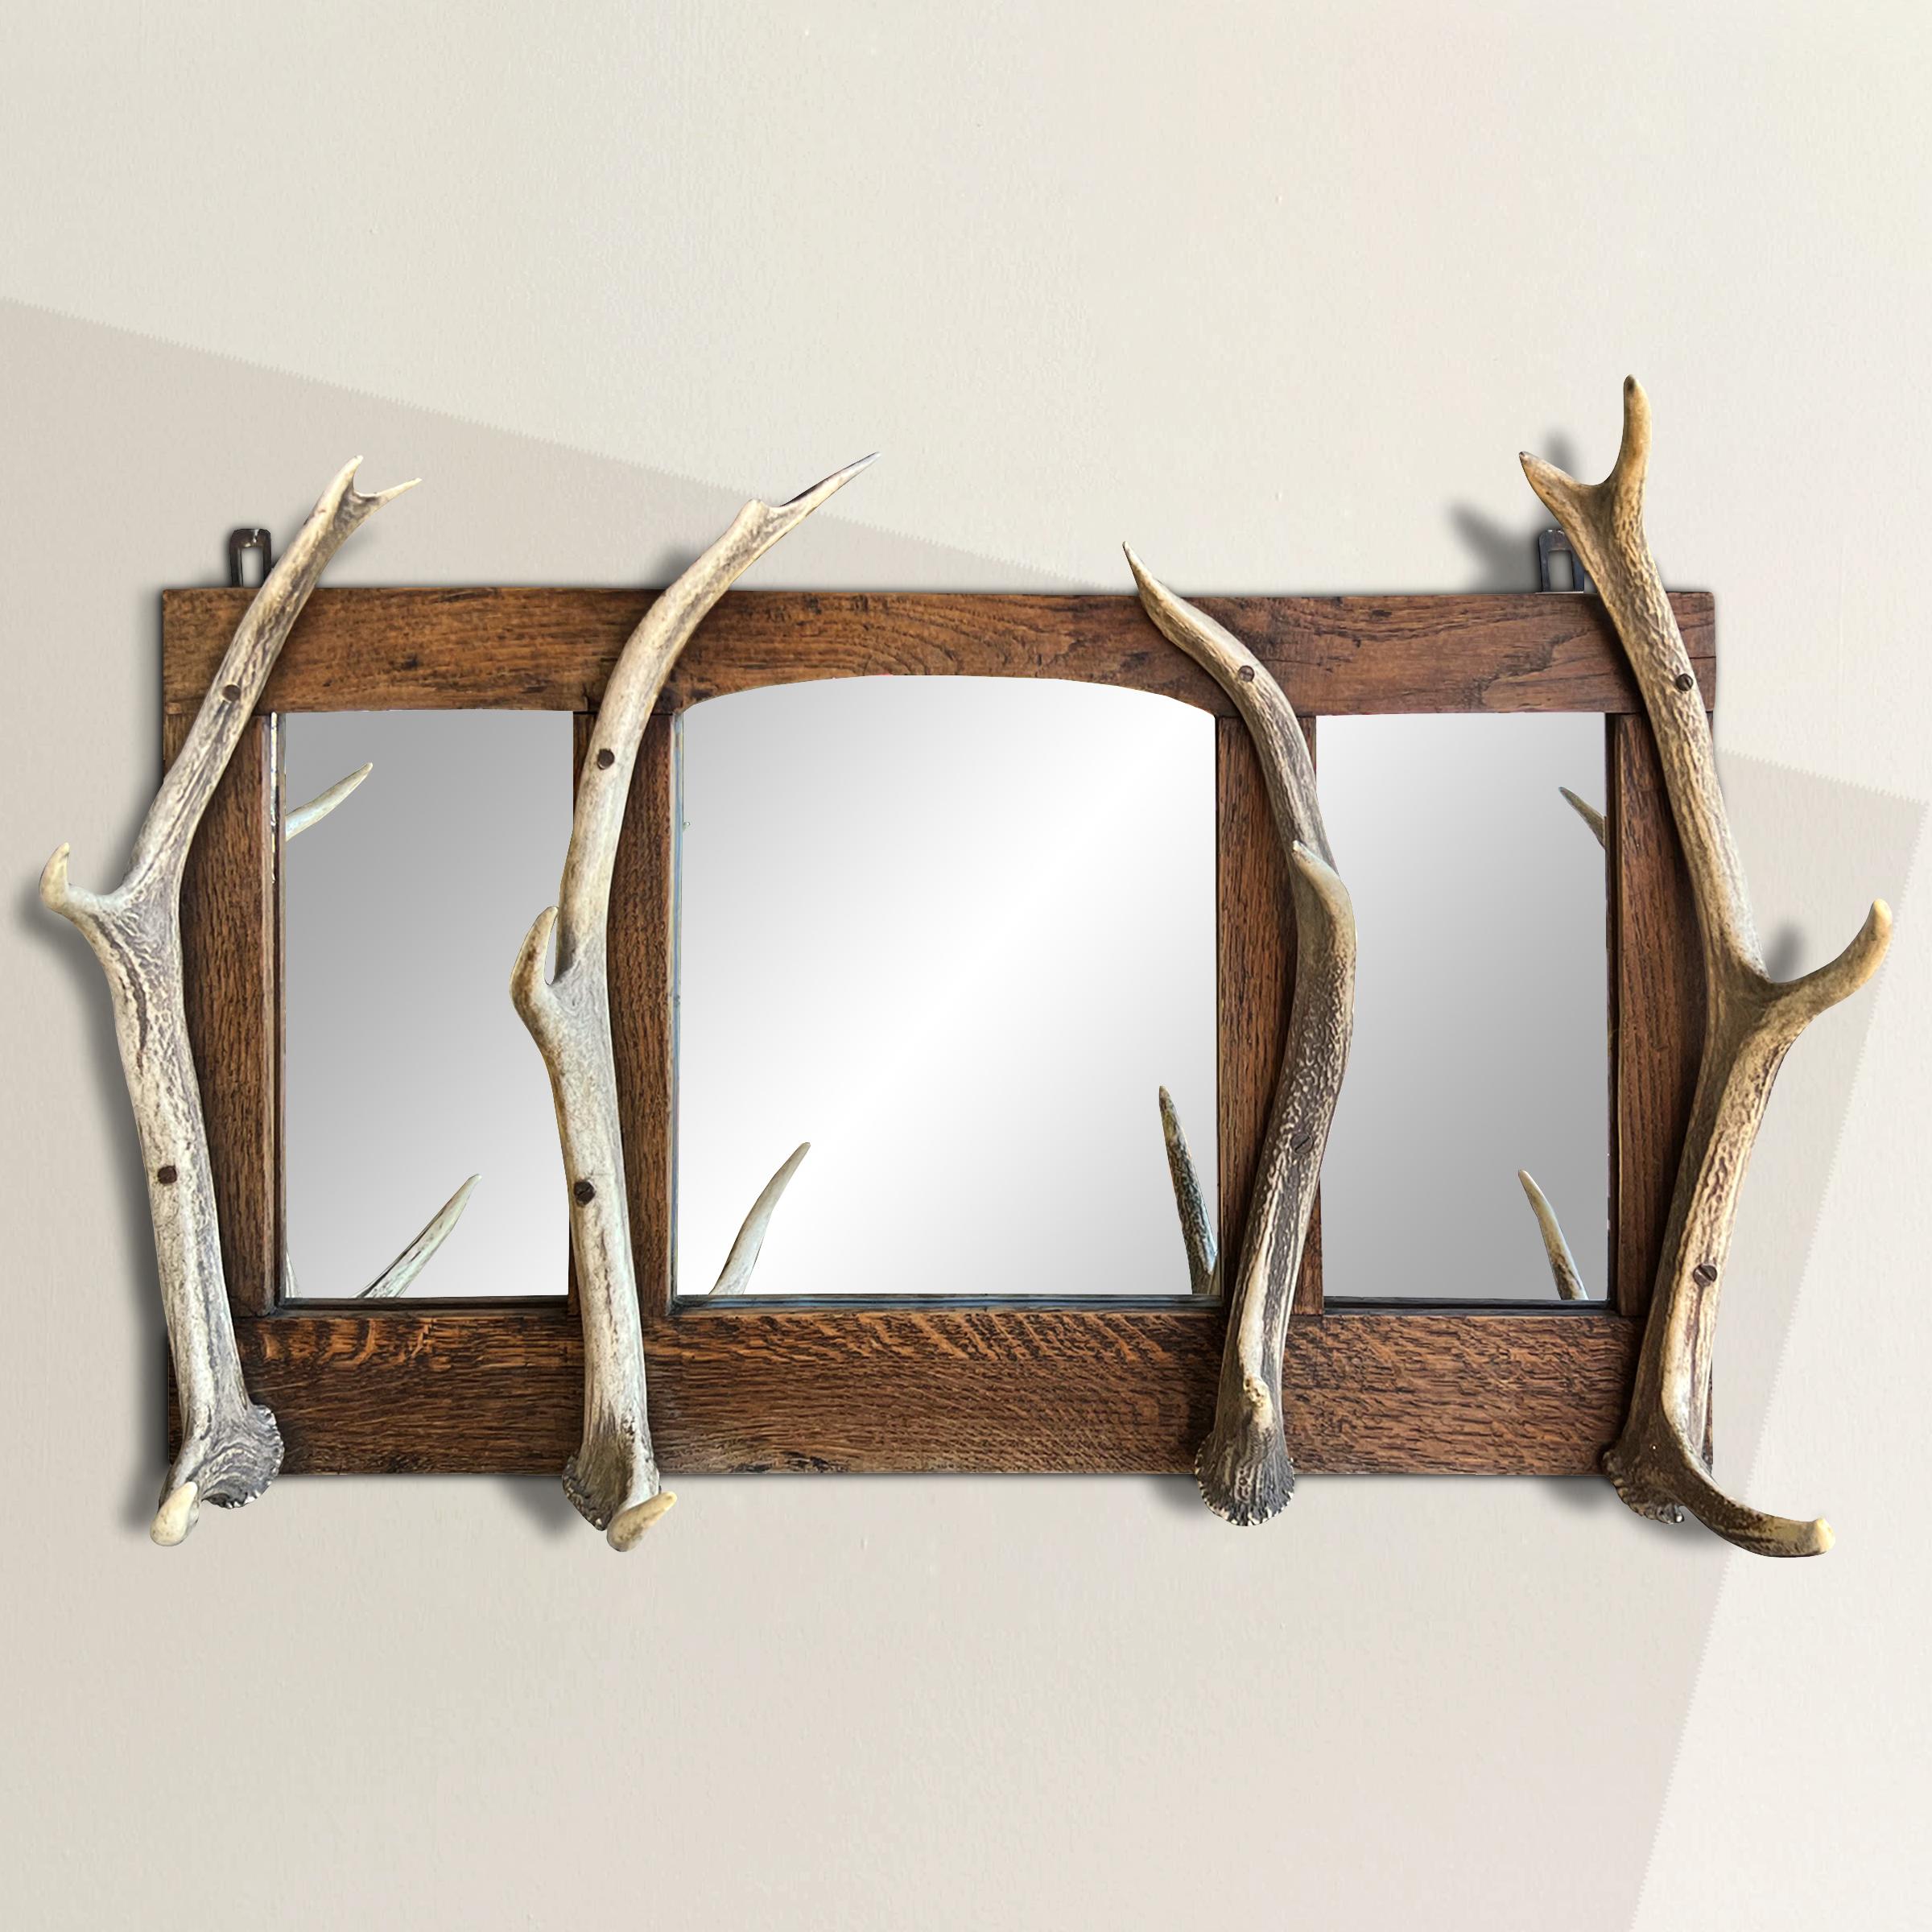 This late 19th-century Swiss Black Forest stag antler coat and hat rack is a testament to the rich tradition of decorative arts originating from the enchanting Black Forest region. The Black Forest is renowned for its masterful woodcraft, and this